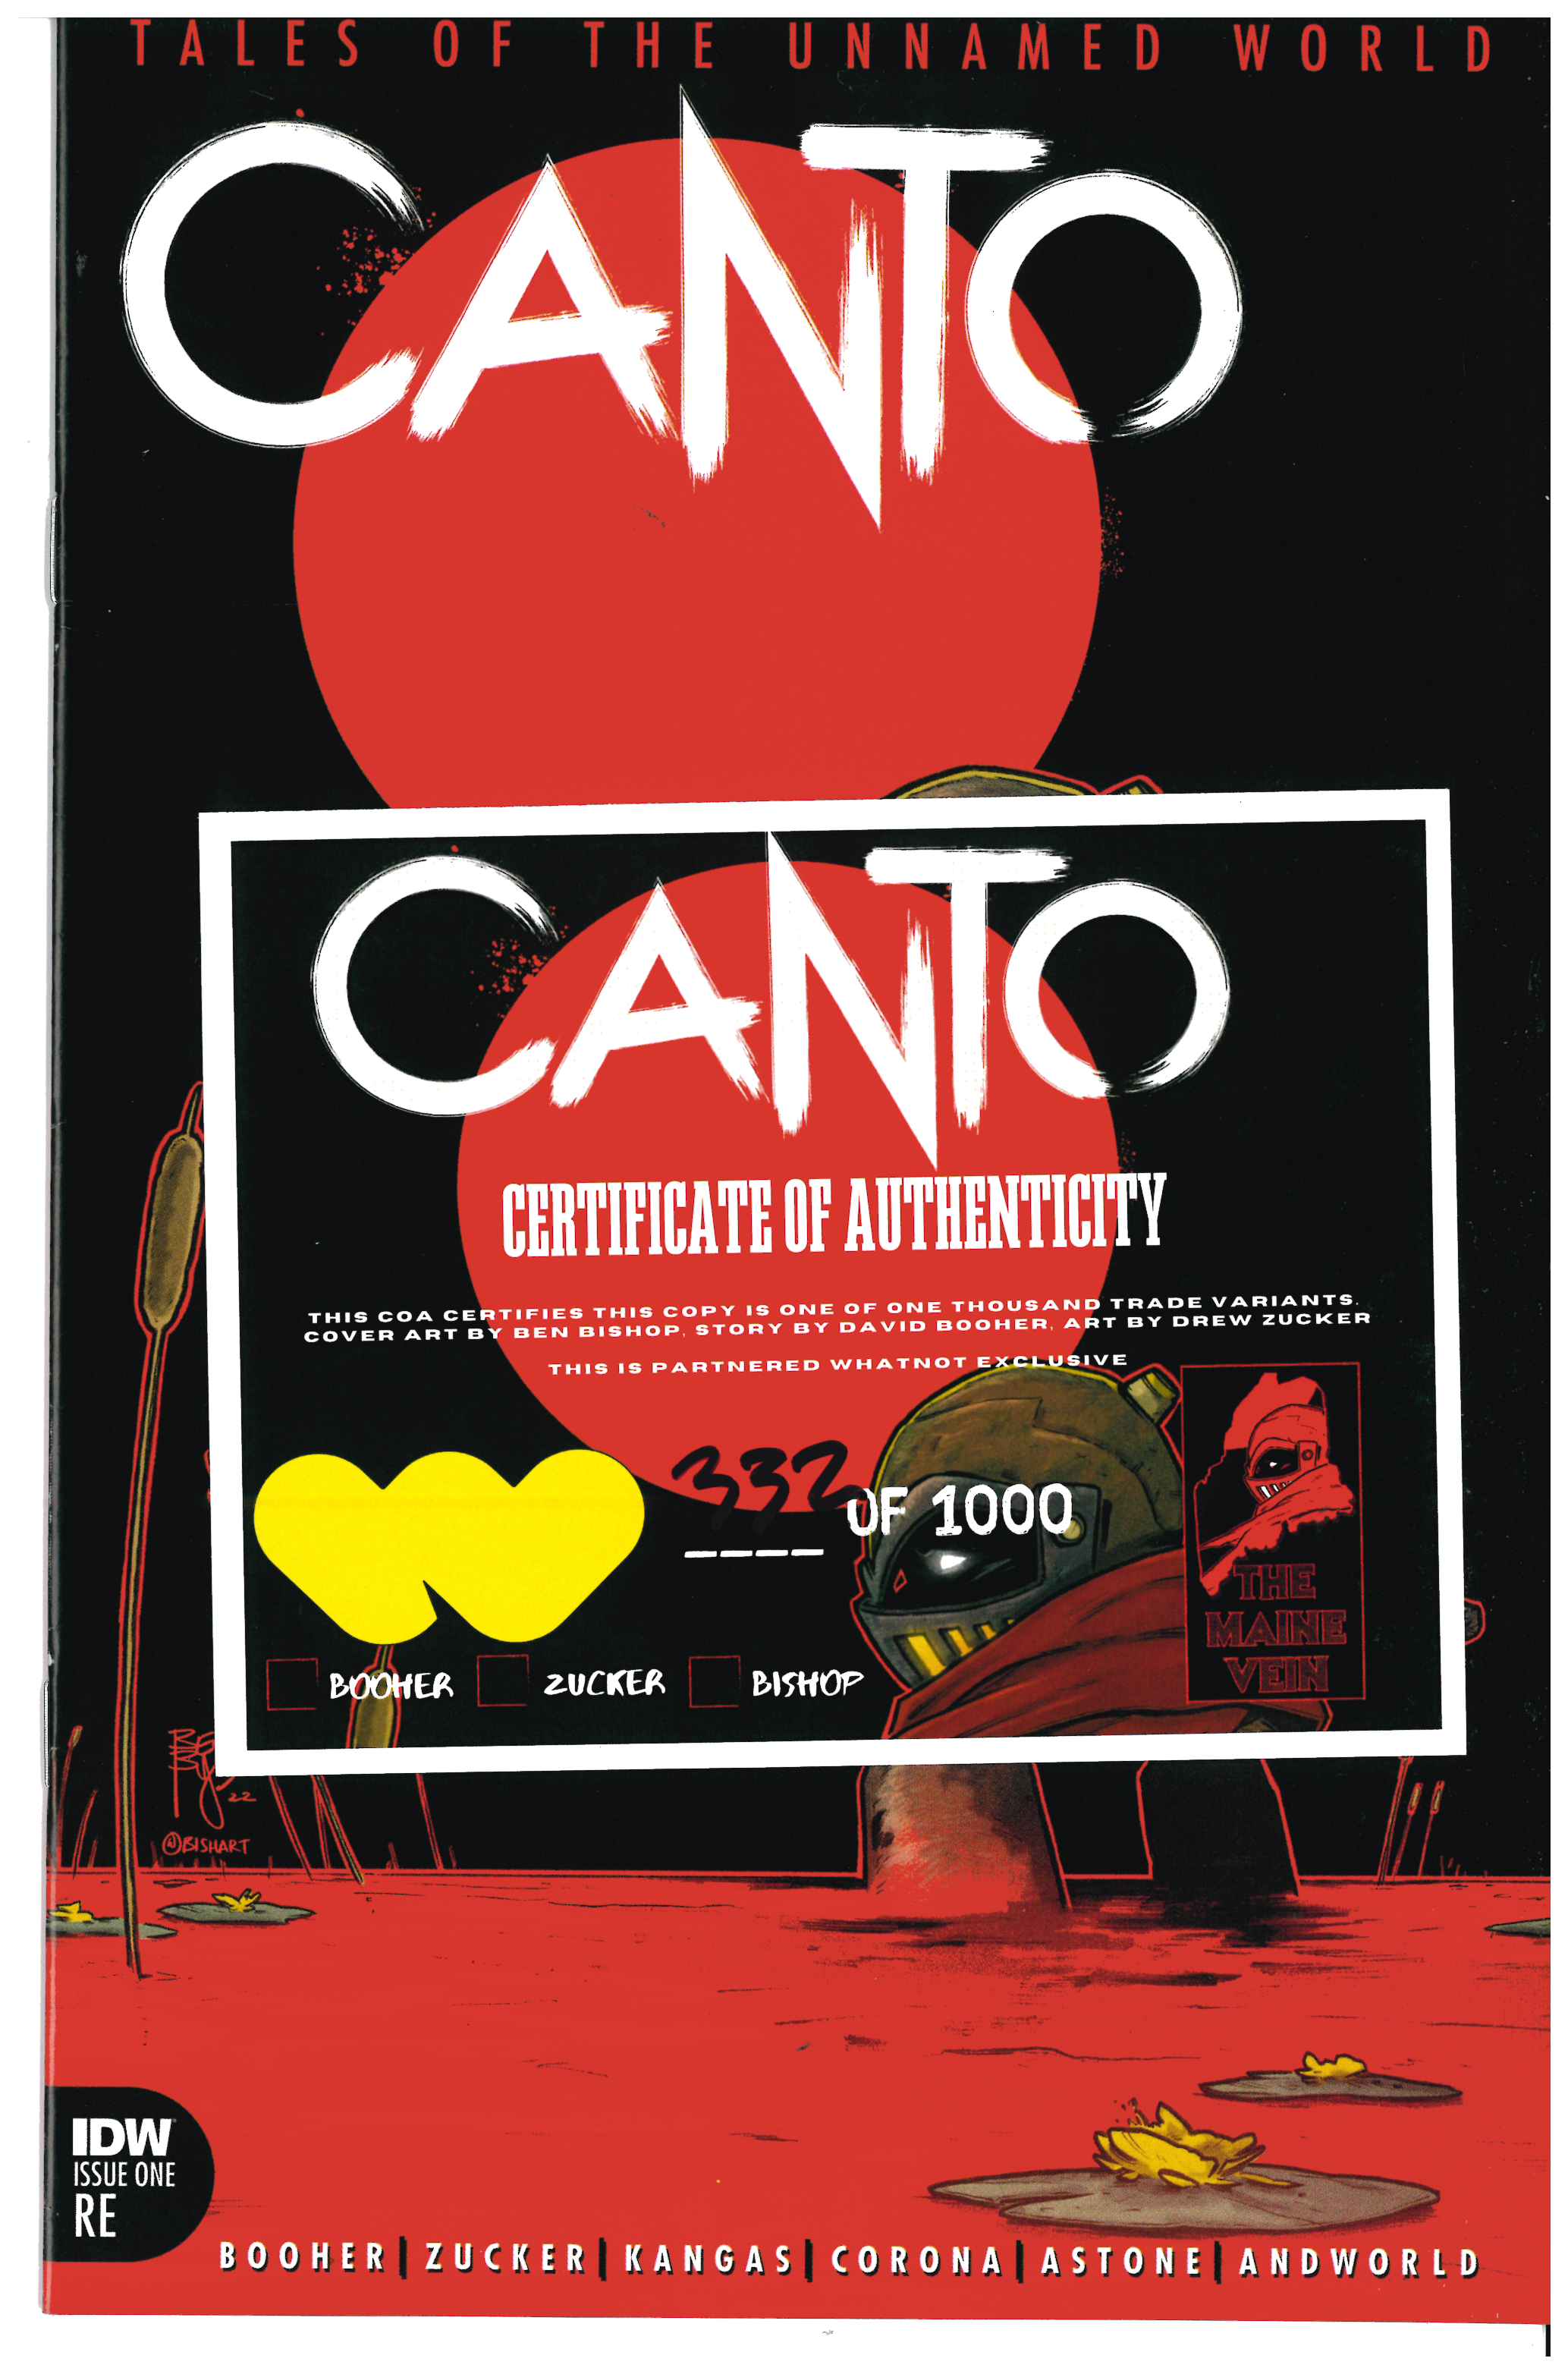 Canto: Tales of The Unnamed World #1 Certificate of Authenticity